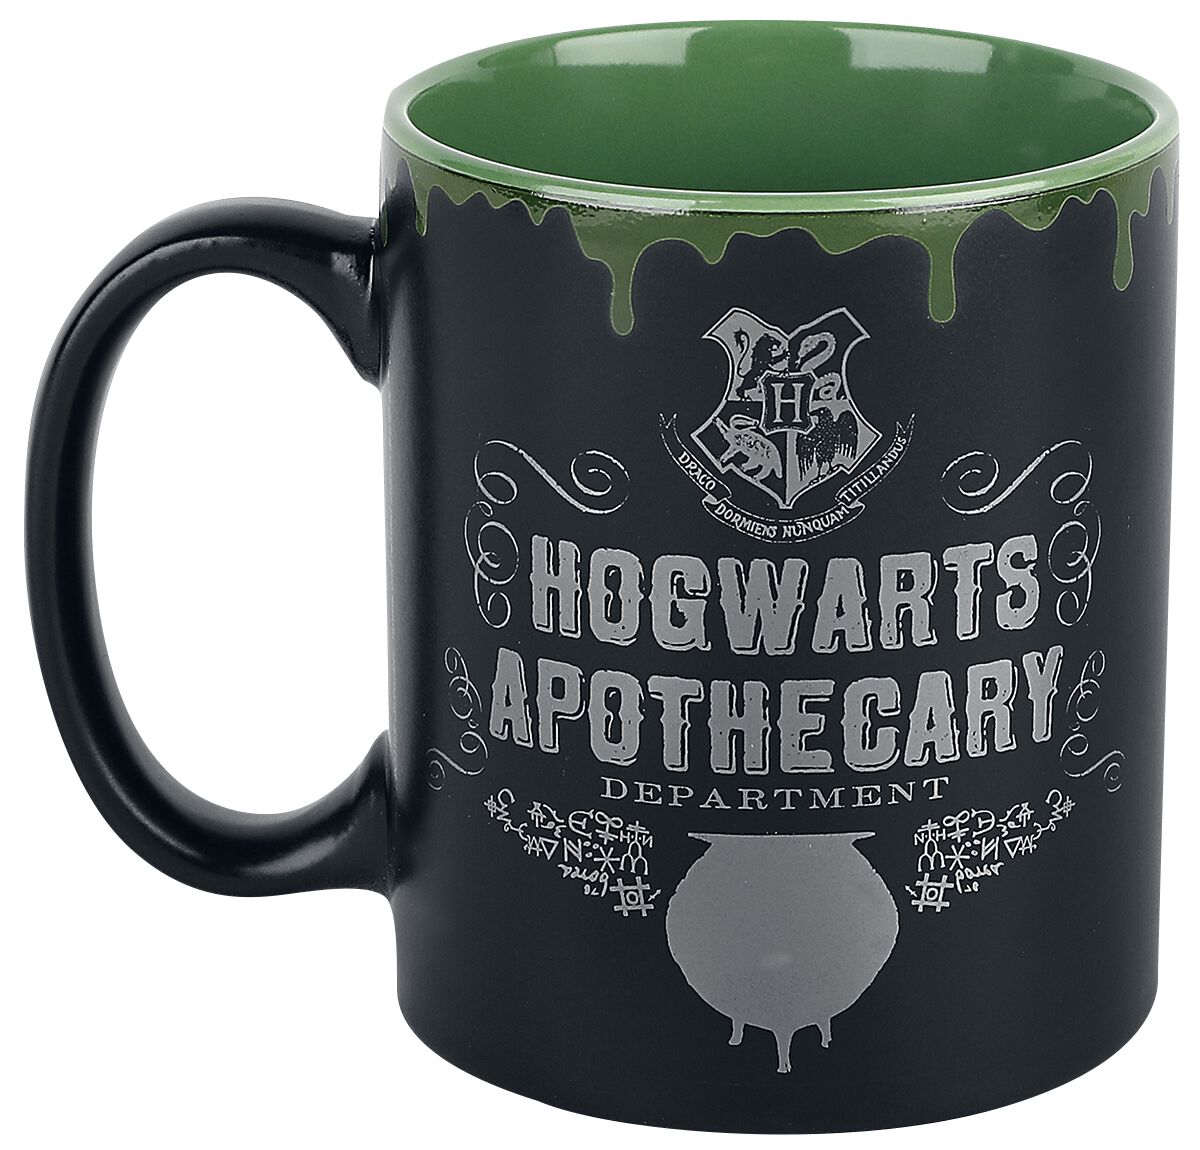 Harry Potter Polyjuice Potion Cup black green